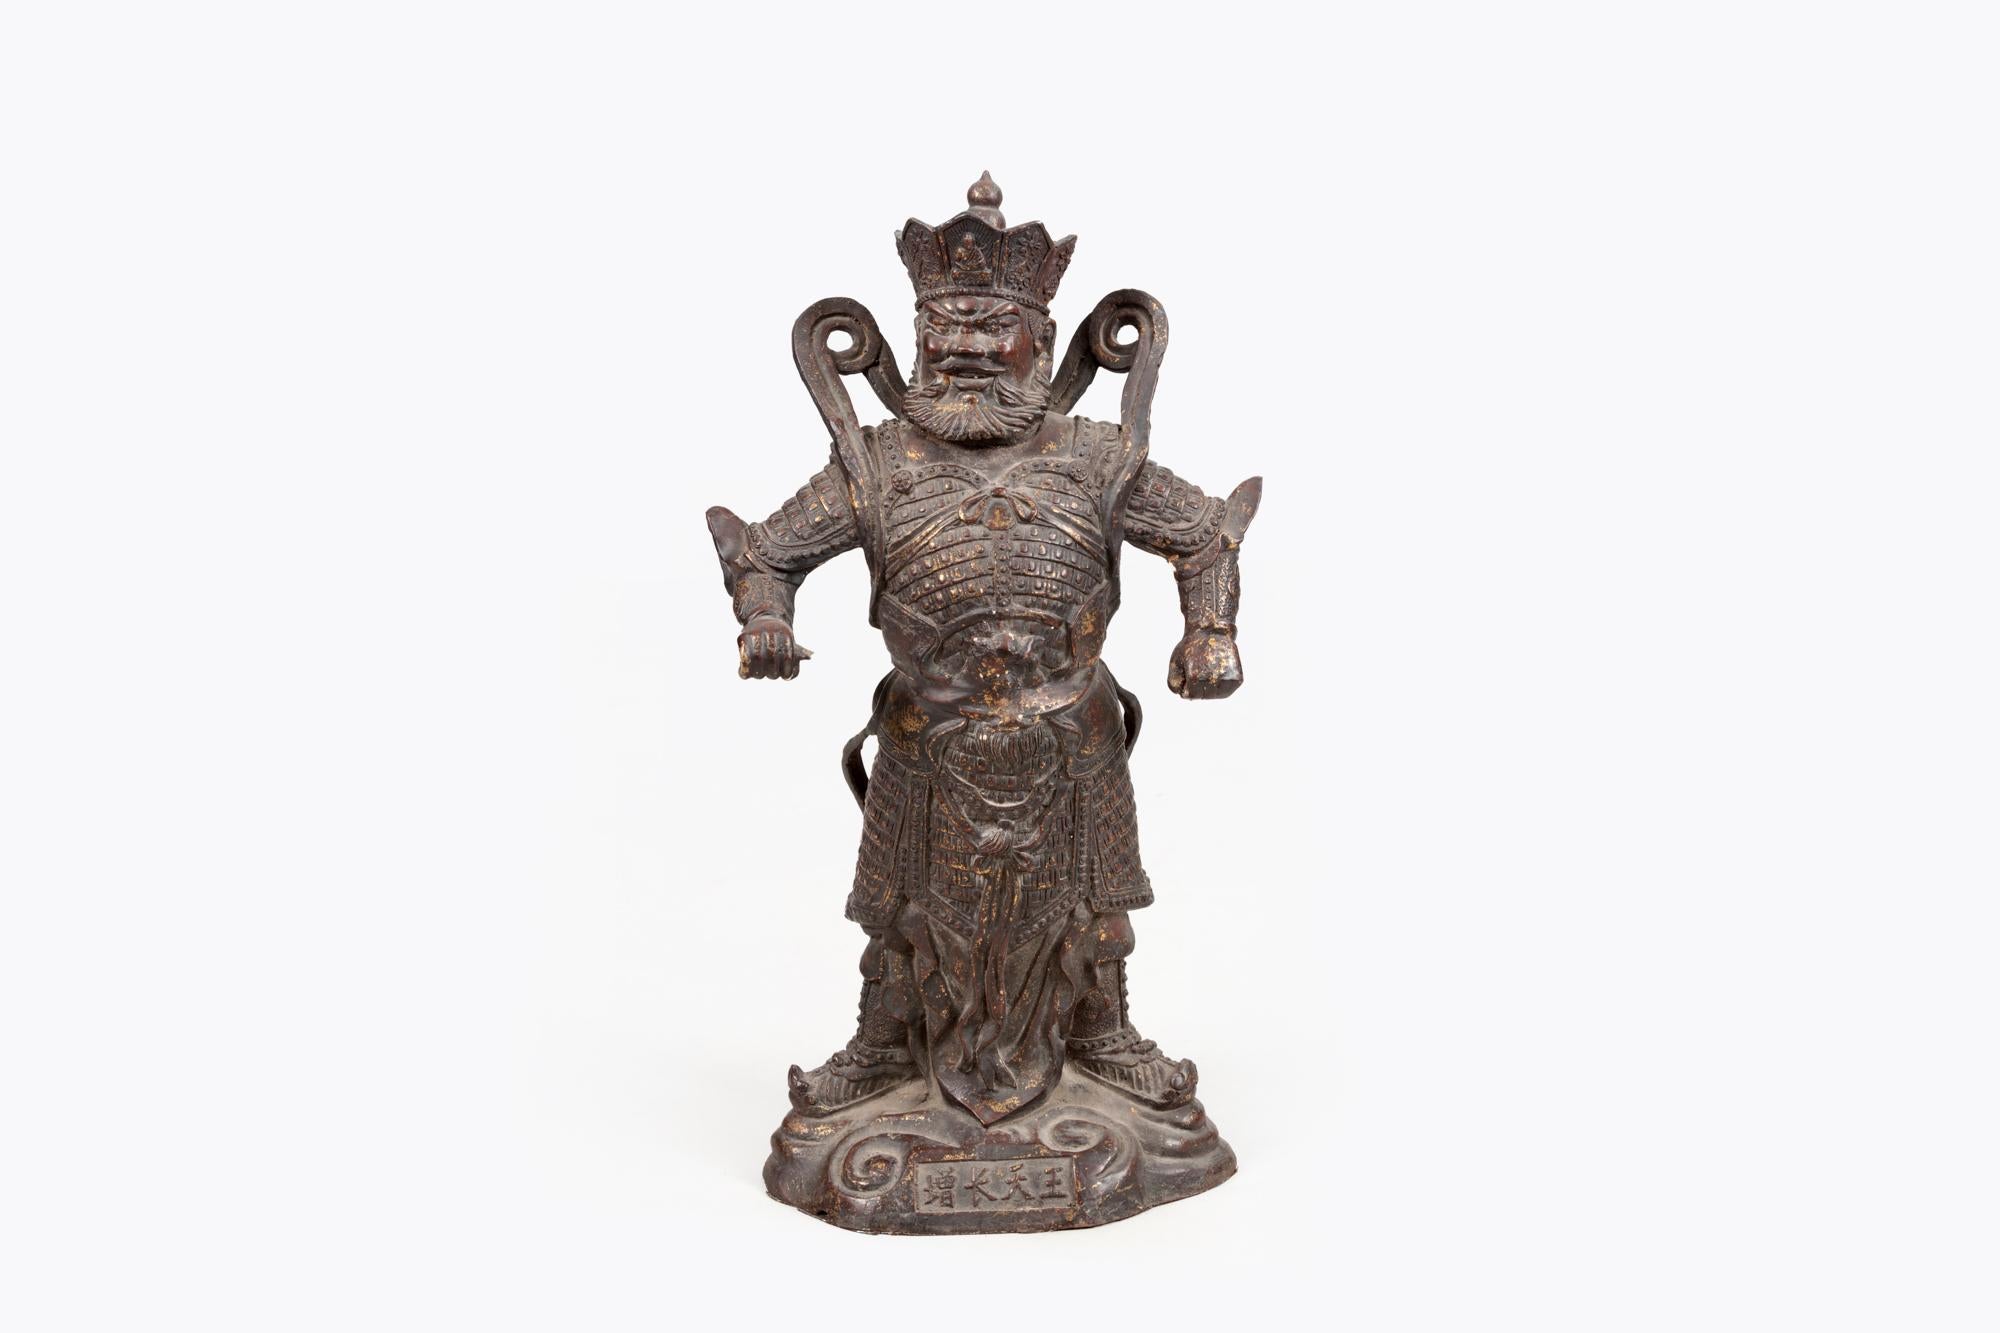 19th Century sculpture of Guan Yu (??), a guardian deity.

Guan Yu (d. A.D. 219), a warrior of the late Han dynasty (206 B.C.–A.D. 220) renowned for his valor and faithfulness, was later venerated as a saint in the Daoist pantheon. Elevated to the